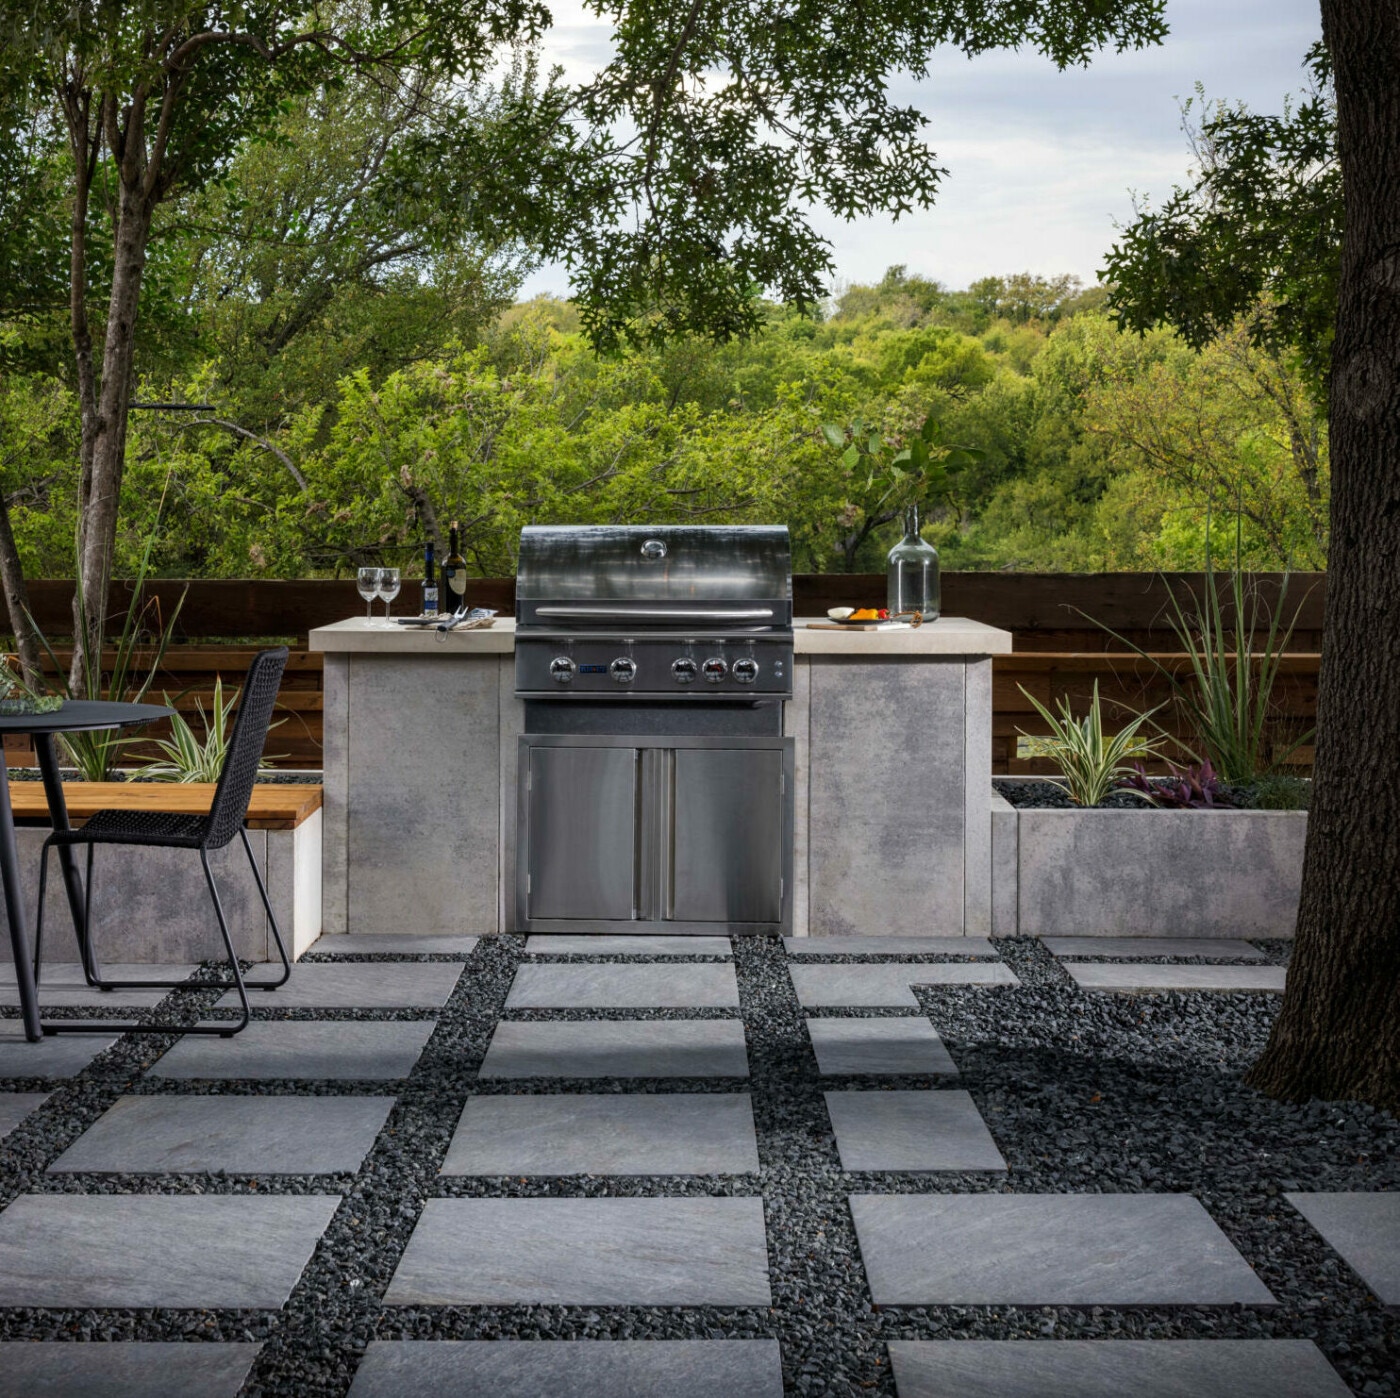 Using Belgard Artforms for Outdoor Benches, Fire Pits, Kitchens and More